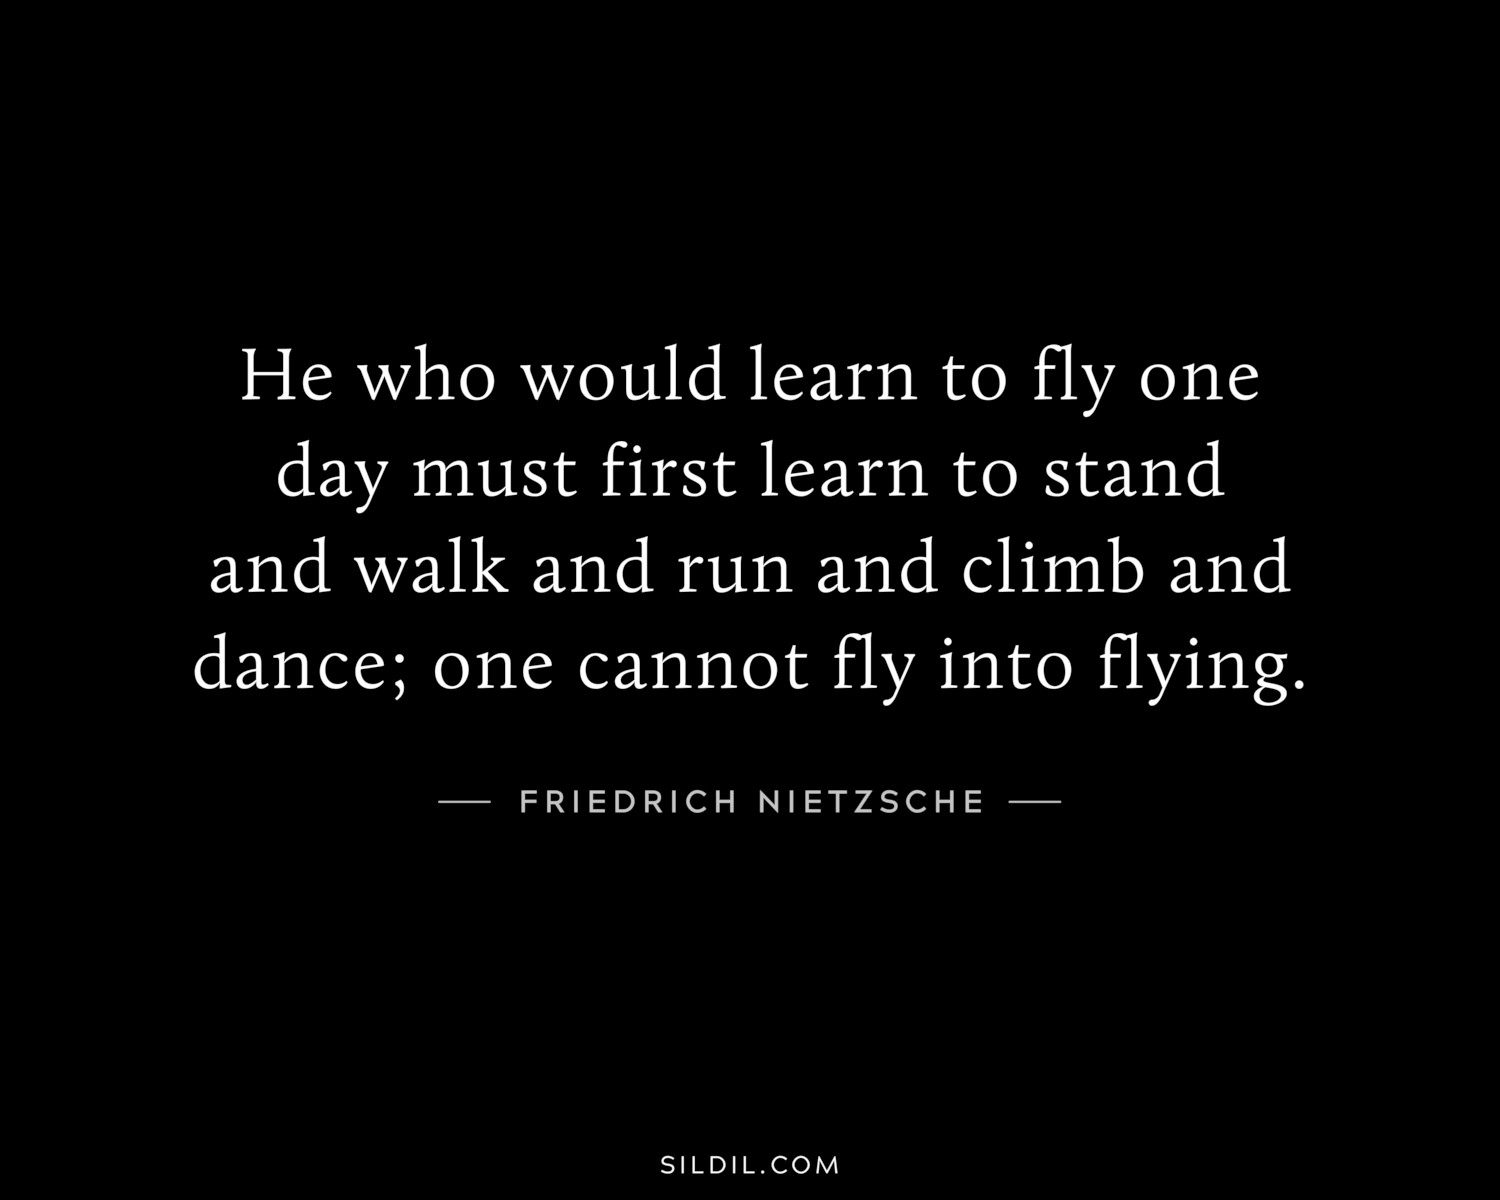 He who would learn to fly one day must first learn to stand and walk and run and climb and dance; one cannot fly into flying.